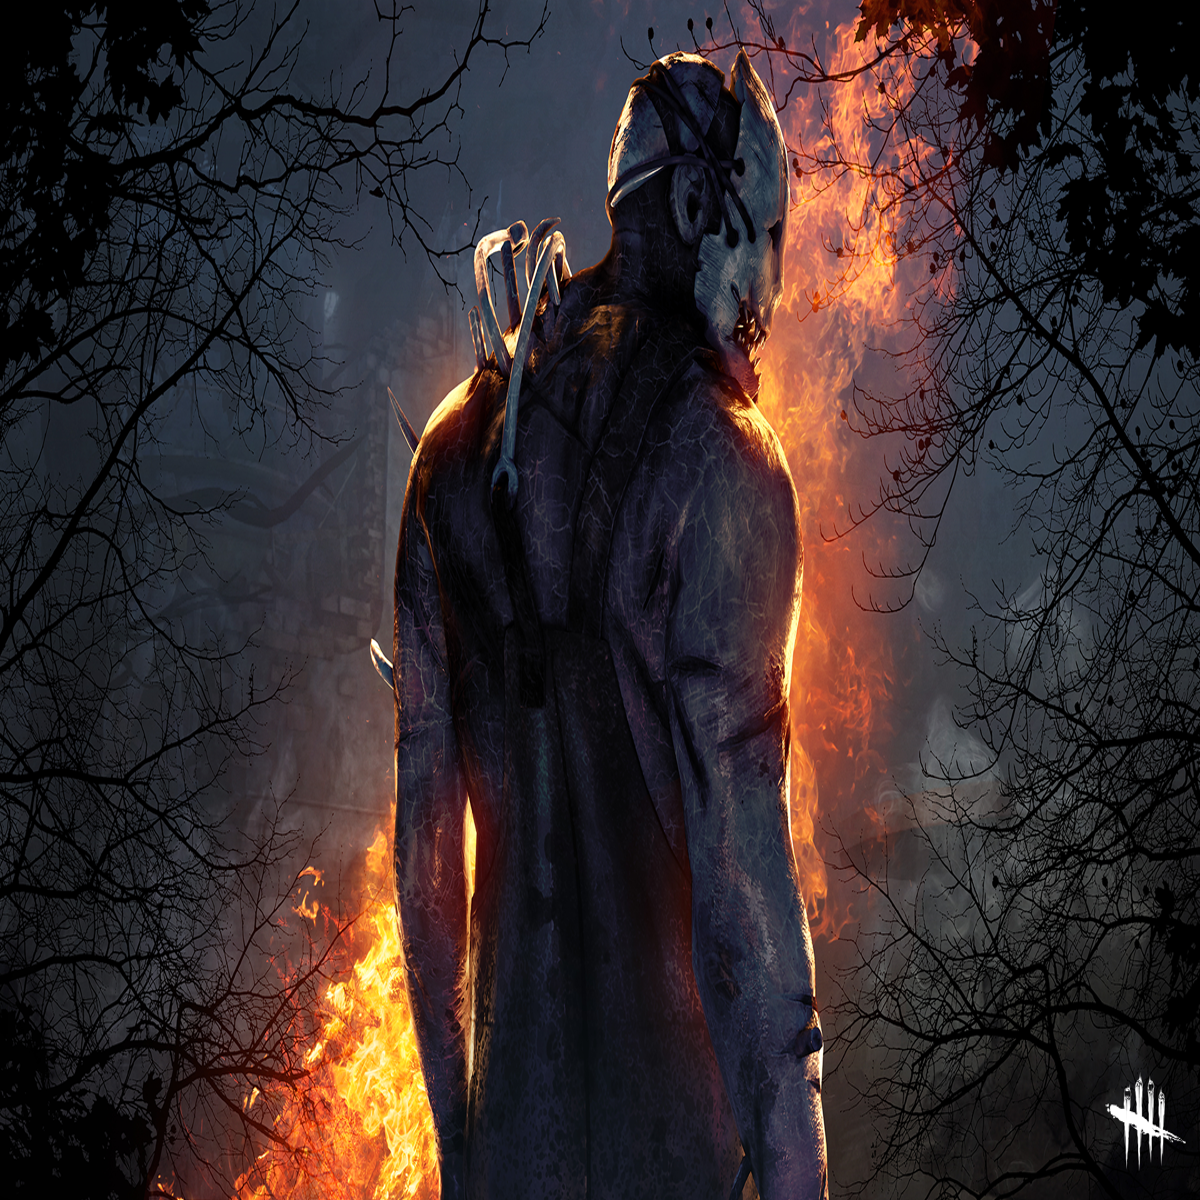 dead by dayligt and  prime gifts — BHVR